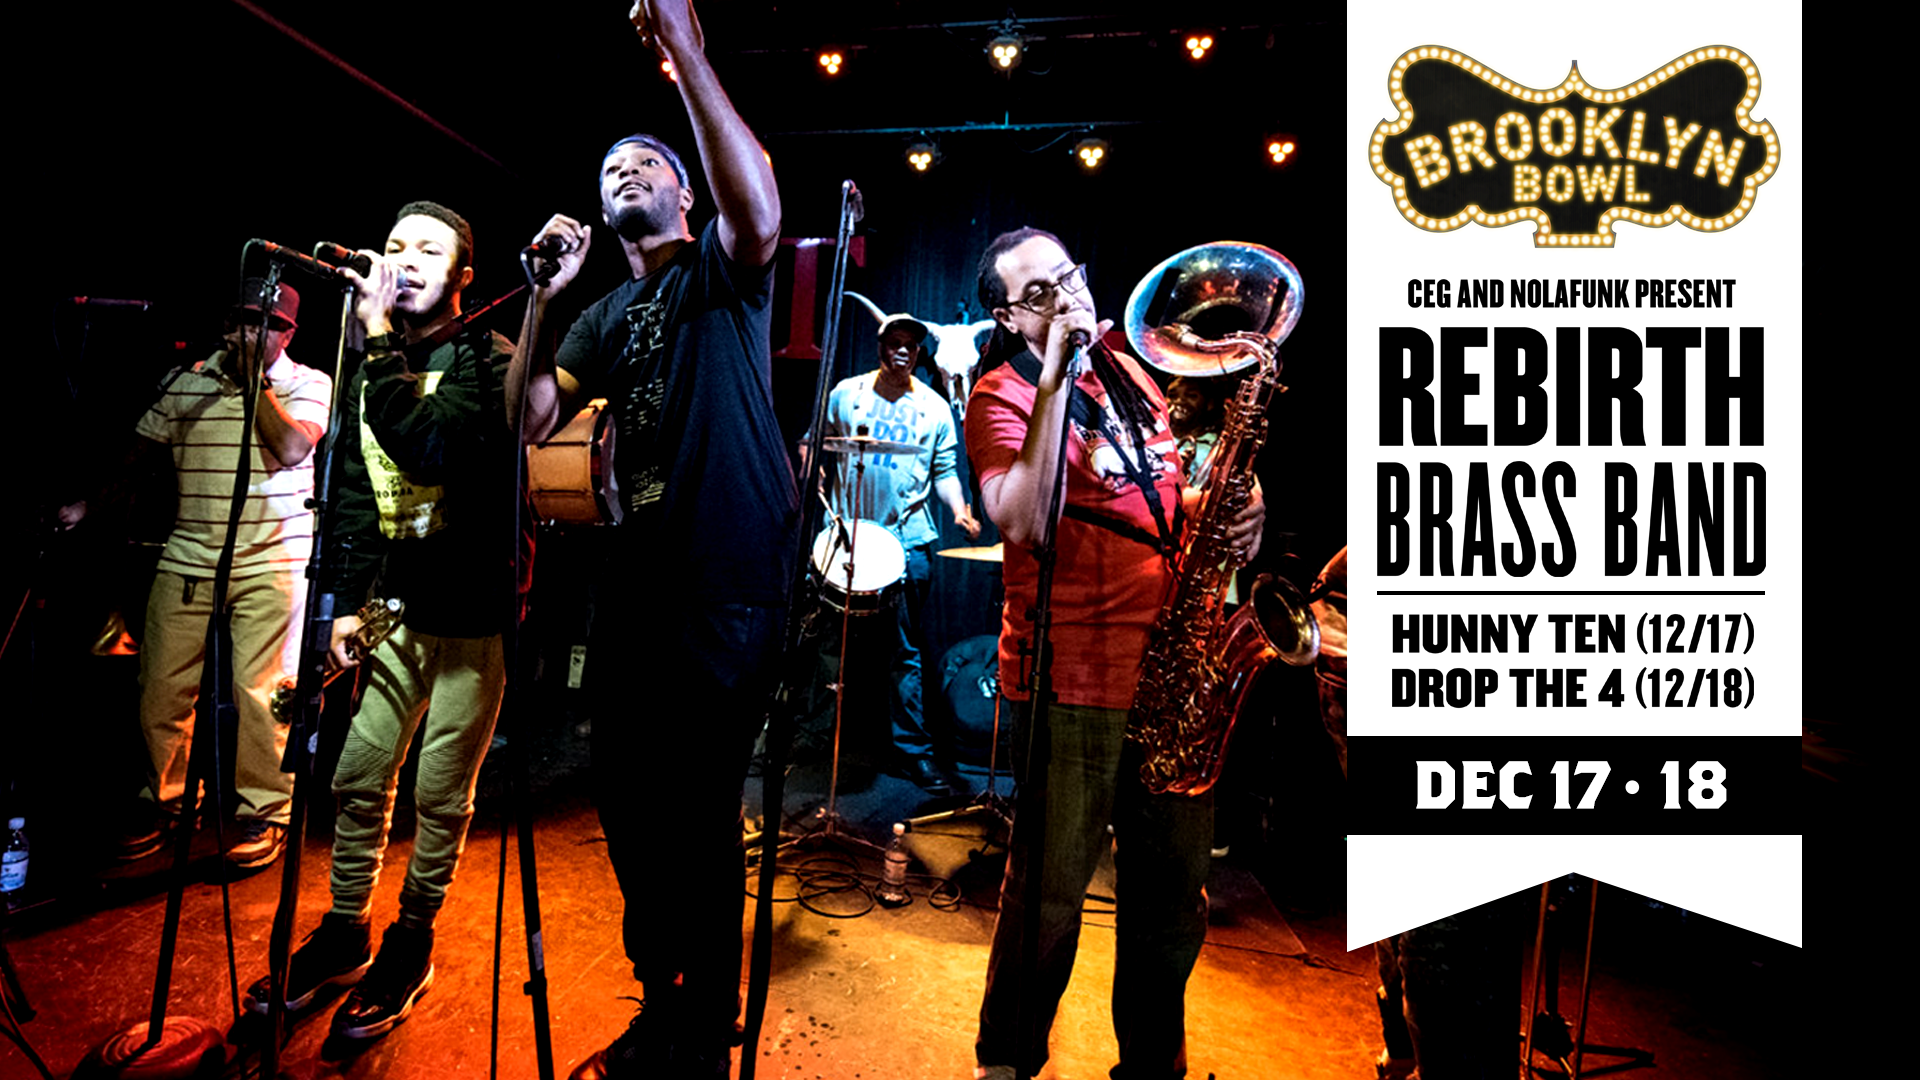 More Info for CONTEST! Win Tickets to Rebirth Brass Band Courtesy of Lagunitas Brewing Company!